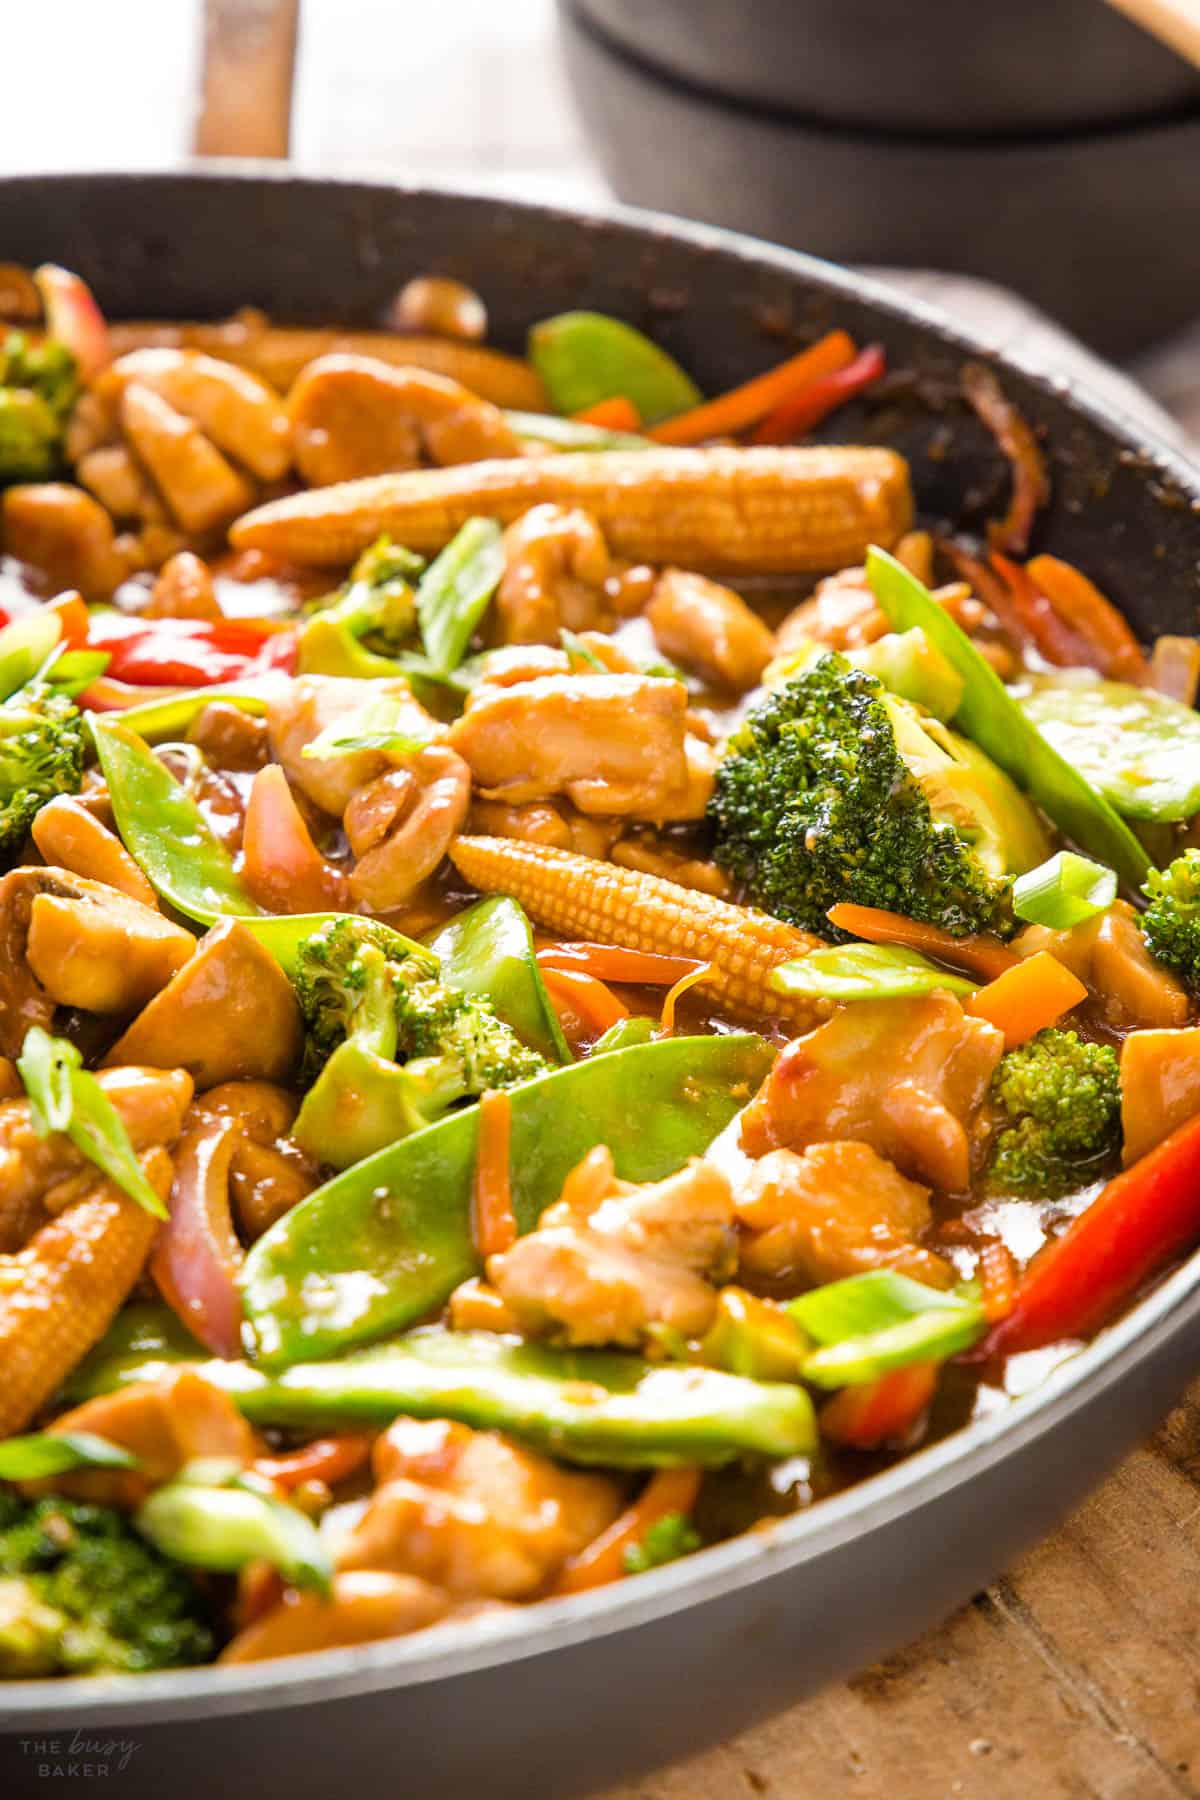 chicken stir fry with sauce and vegetables